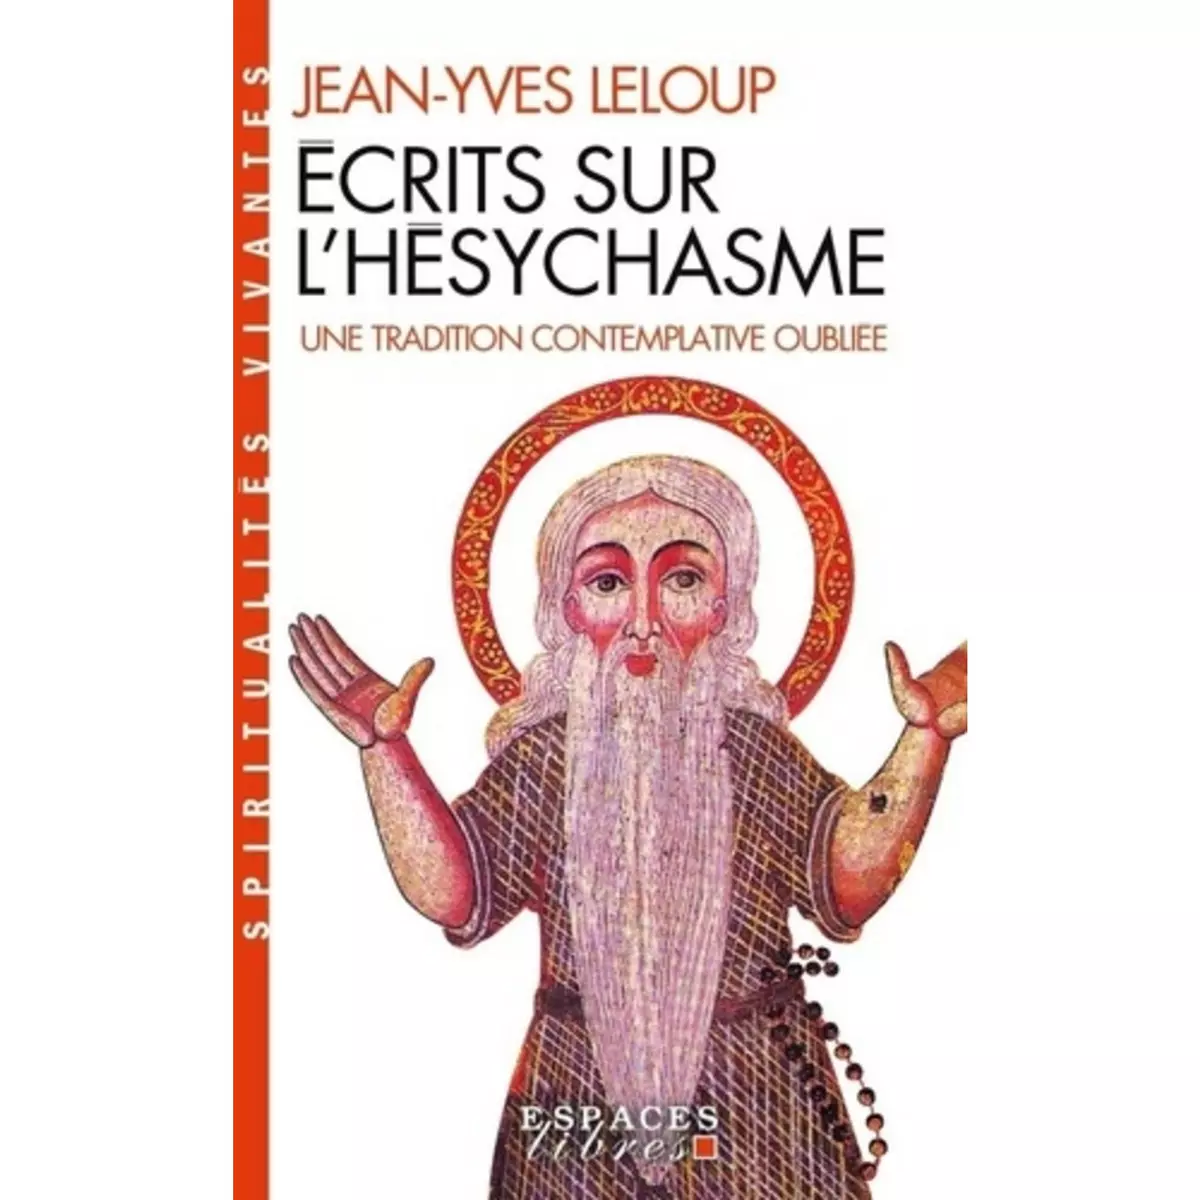  ECRITS SUR L'HESYCHASME. UNE TRADITION CONTEMPLATIVE OUBLIEE, Leloup Jean-Yves